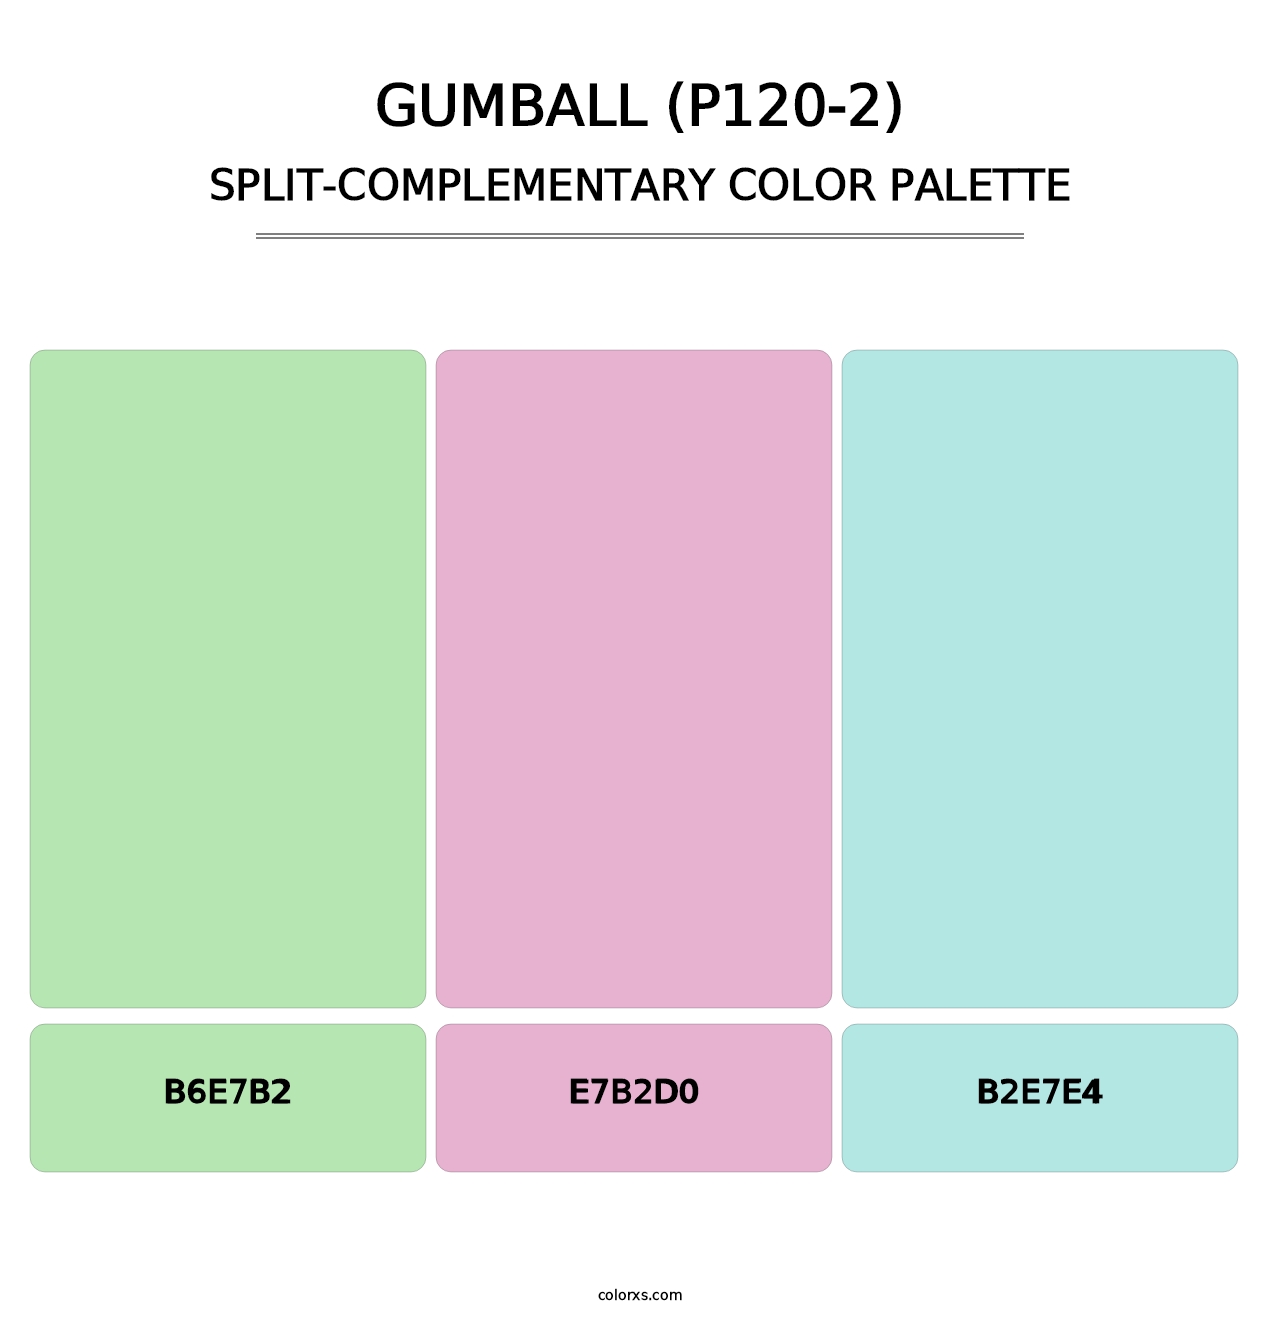 Gumball (P120-2) - Split-Complementary Color Palette